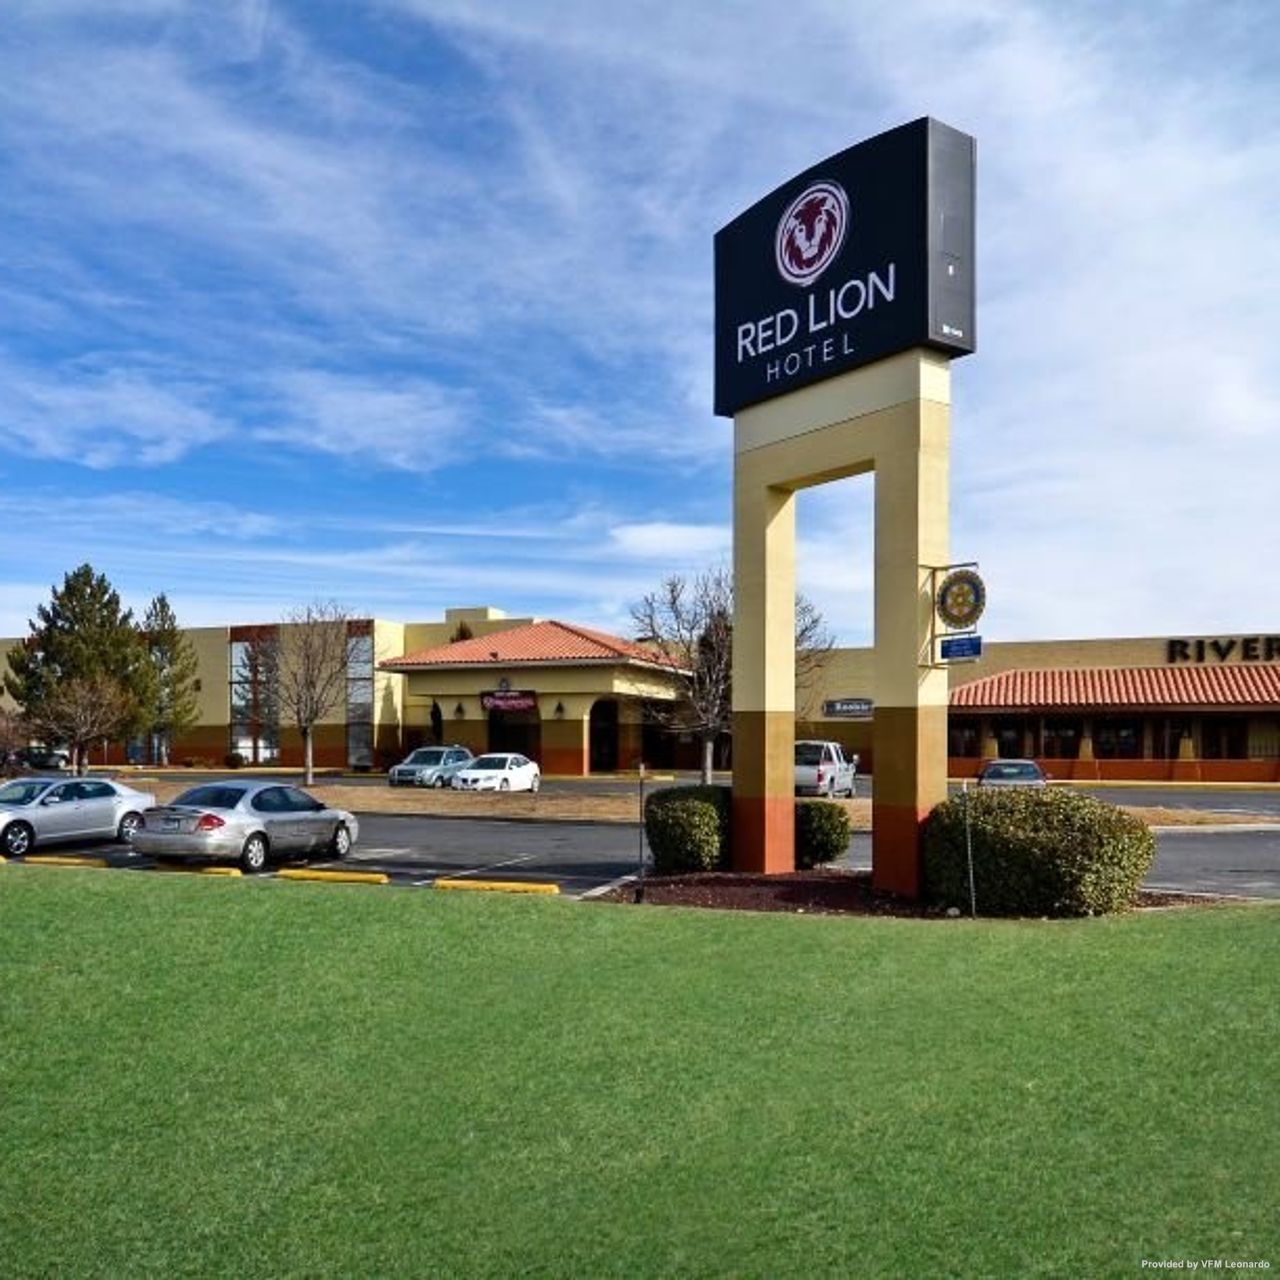 Red Lion Hotel Farmington United States Of America At Hrs With Free Services [ 1280 x 1280 Pixel ]